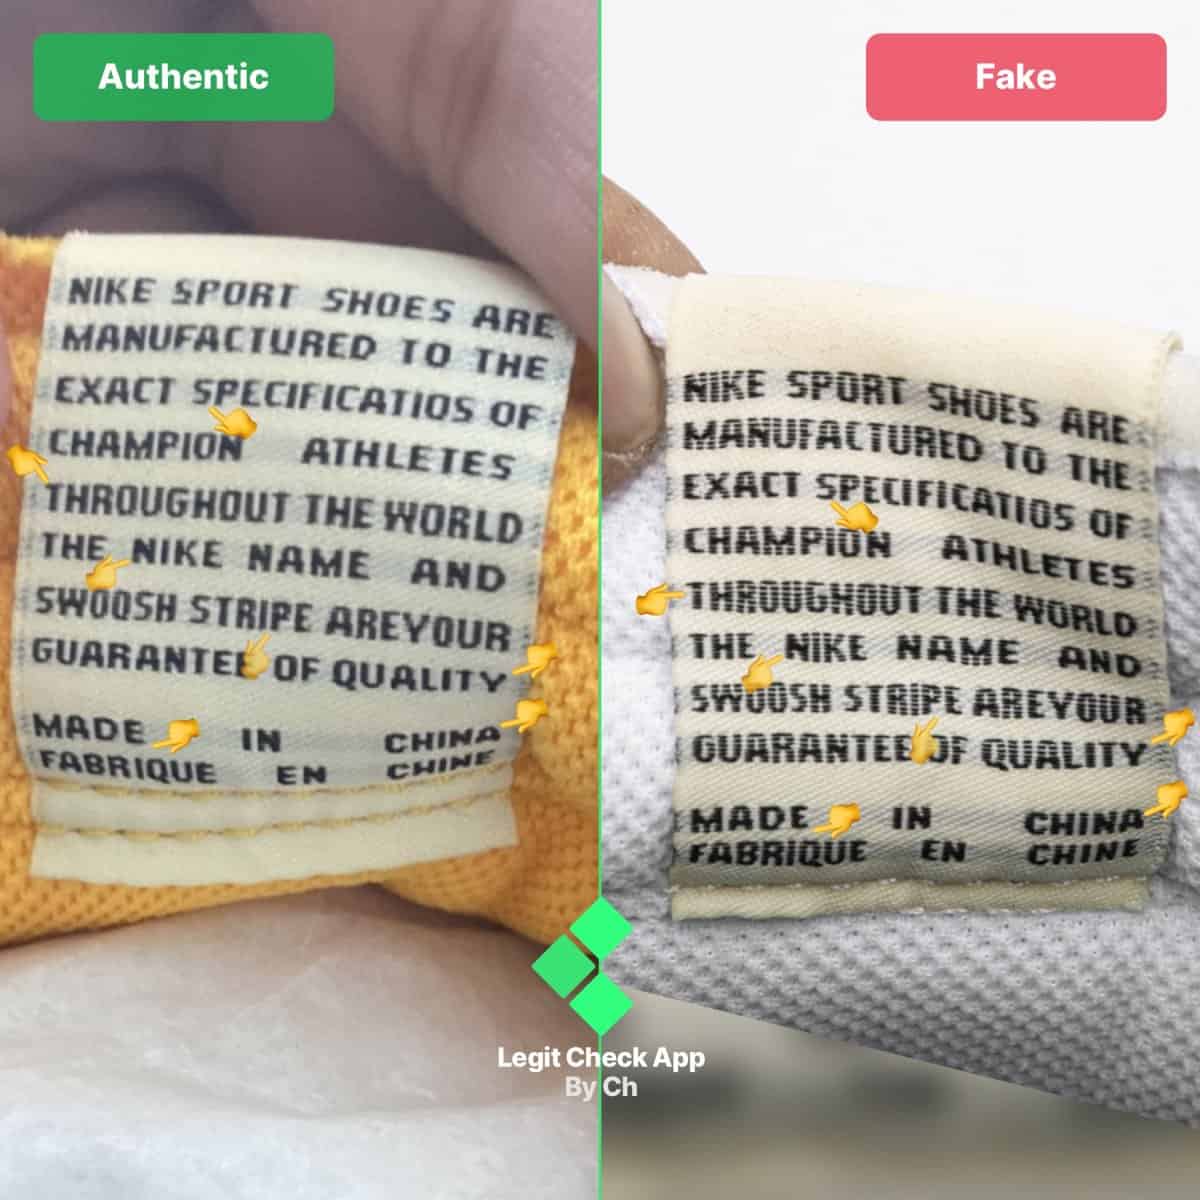 How To Spot Fake Off-White Dunks - Legit Check By Ch